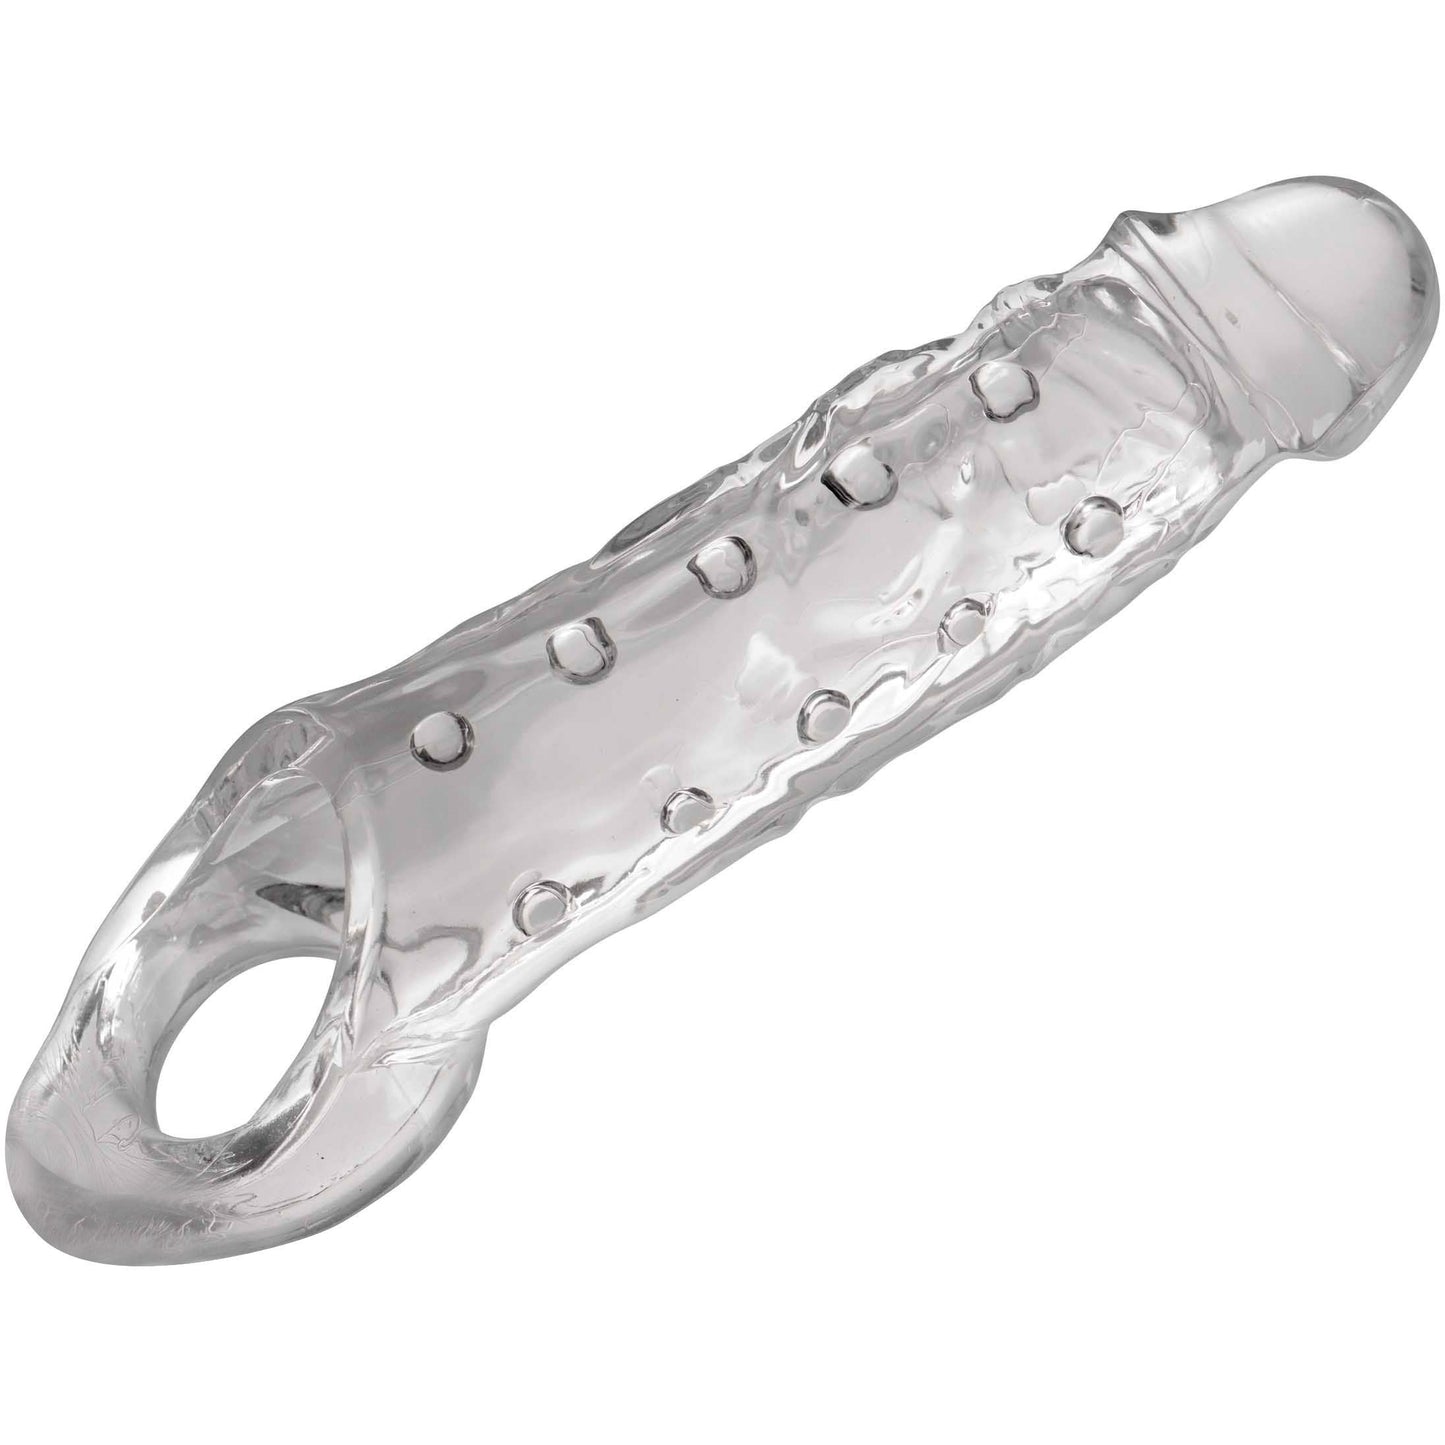 Clearly Ample Penis Enhancer Sheath